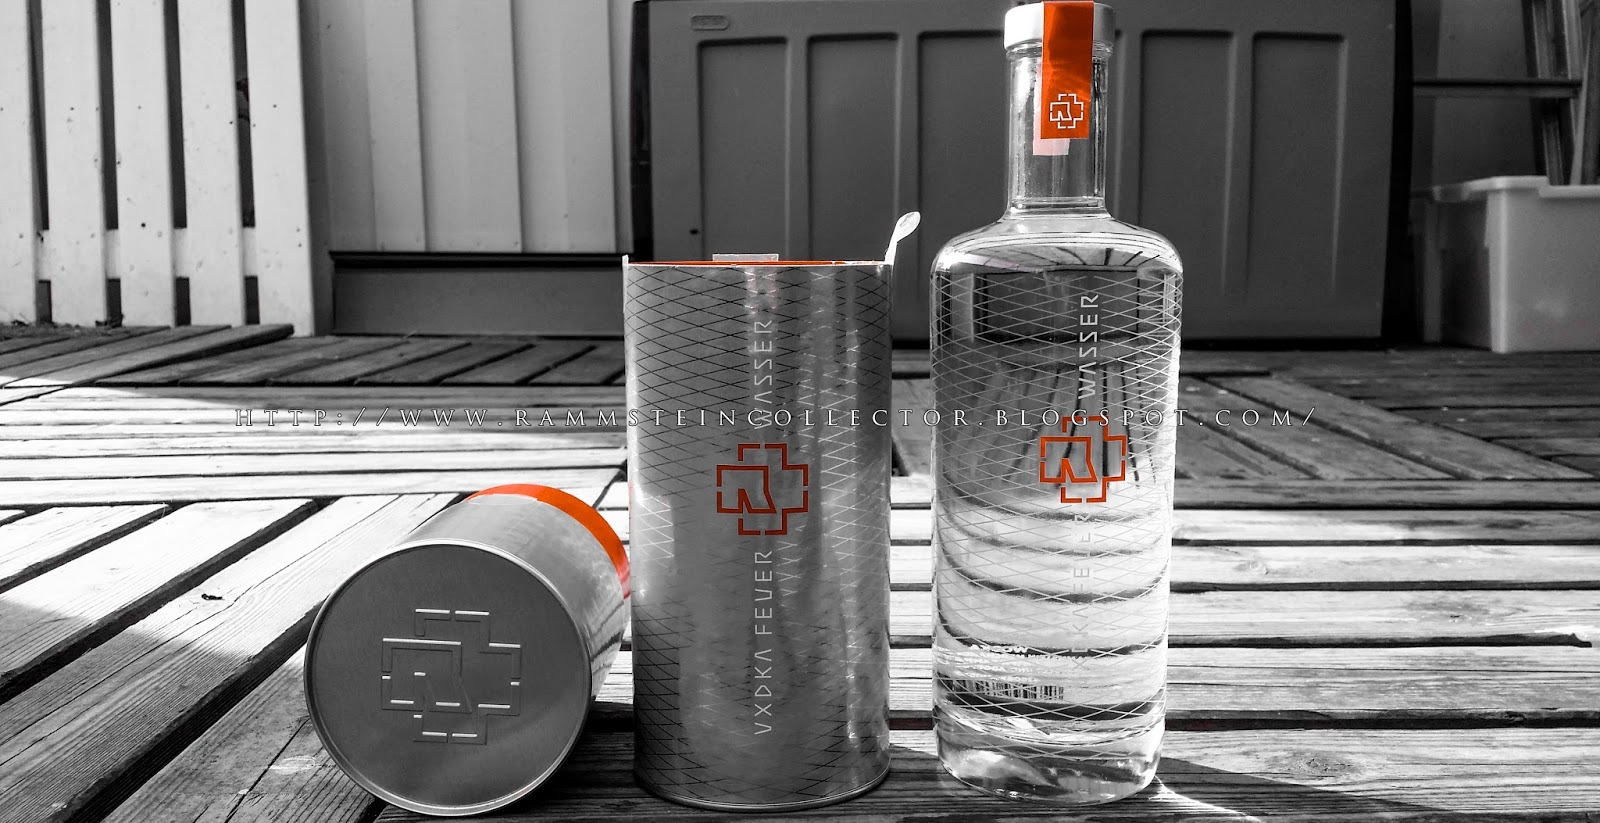 RAMMSTEIN | Welcome to the Rammstein collection by RC: Rammstein VODKA ...